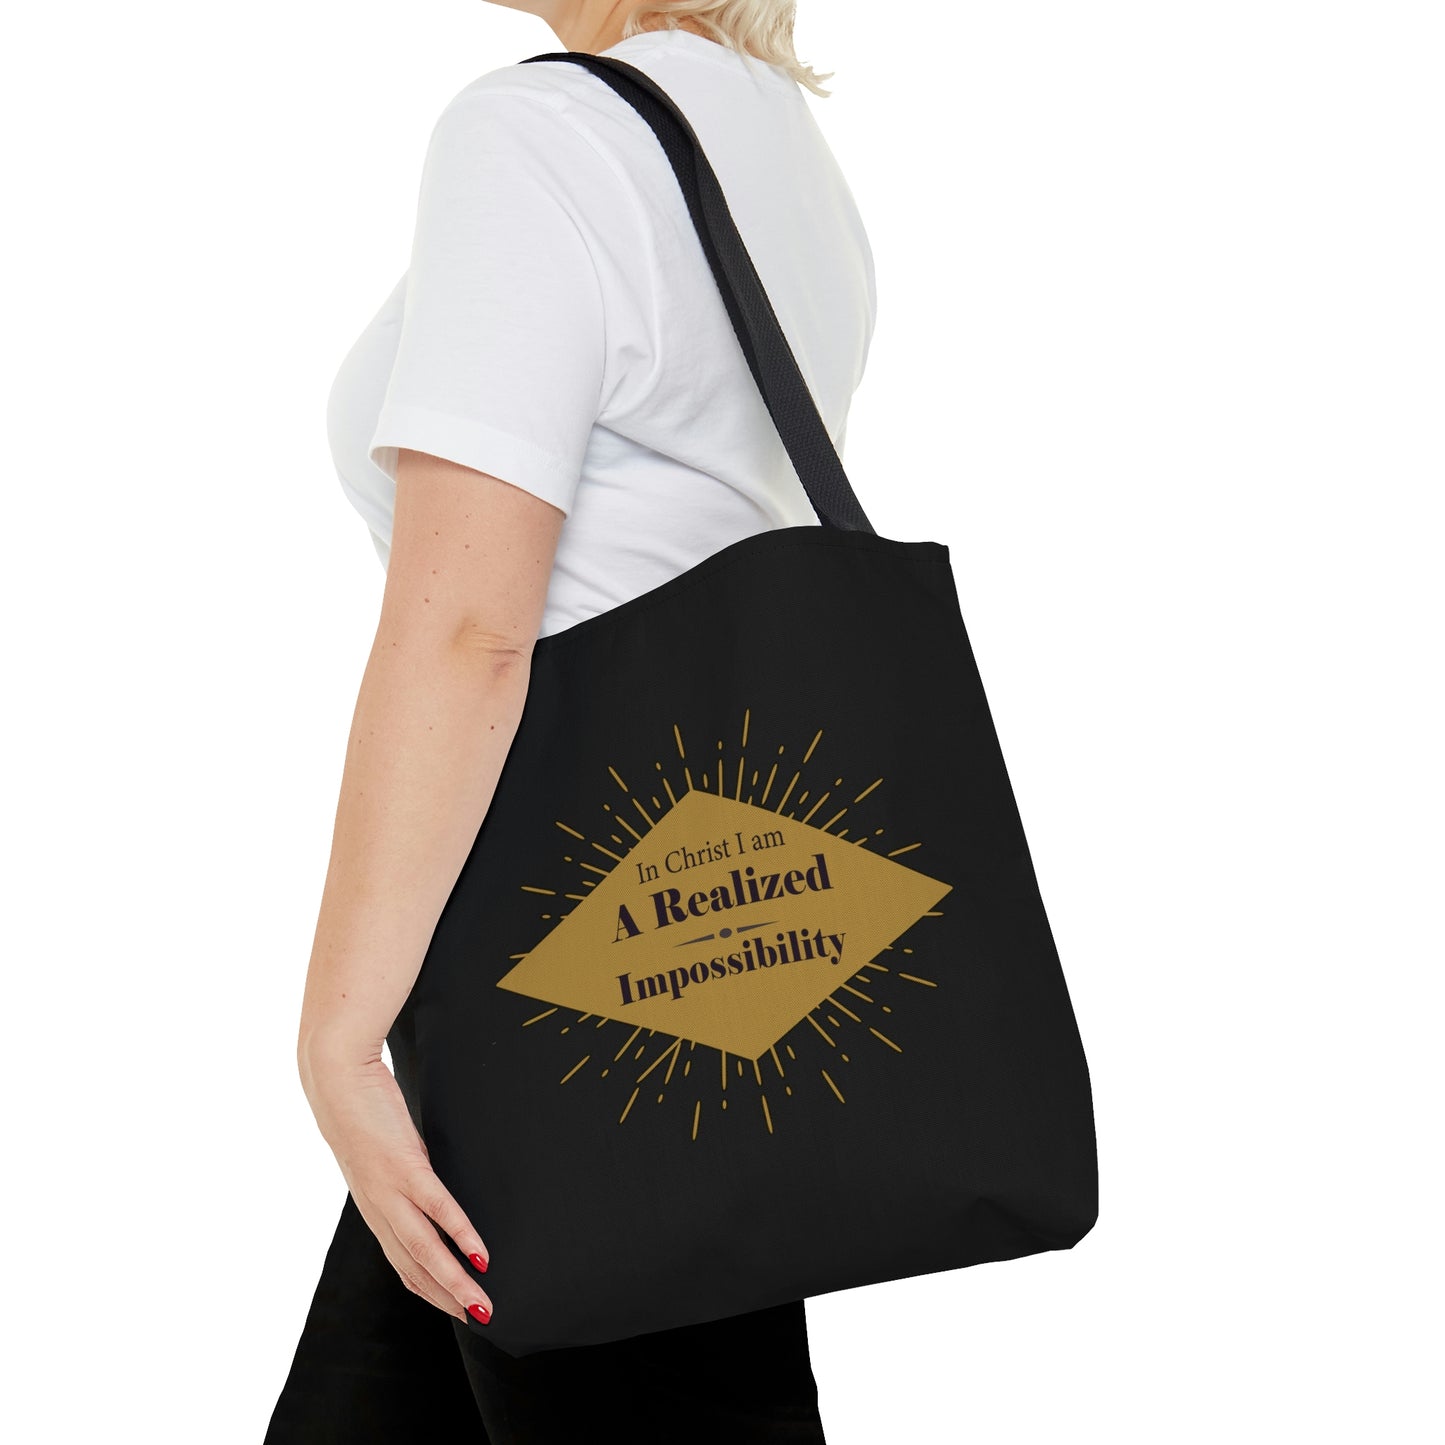 In Christ I Am A Realized Impossibility Tote Bag